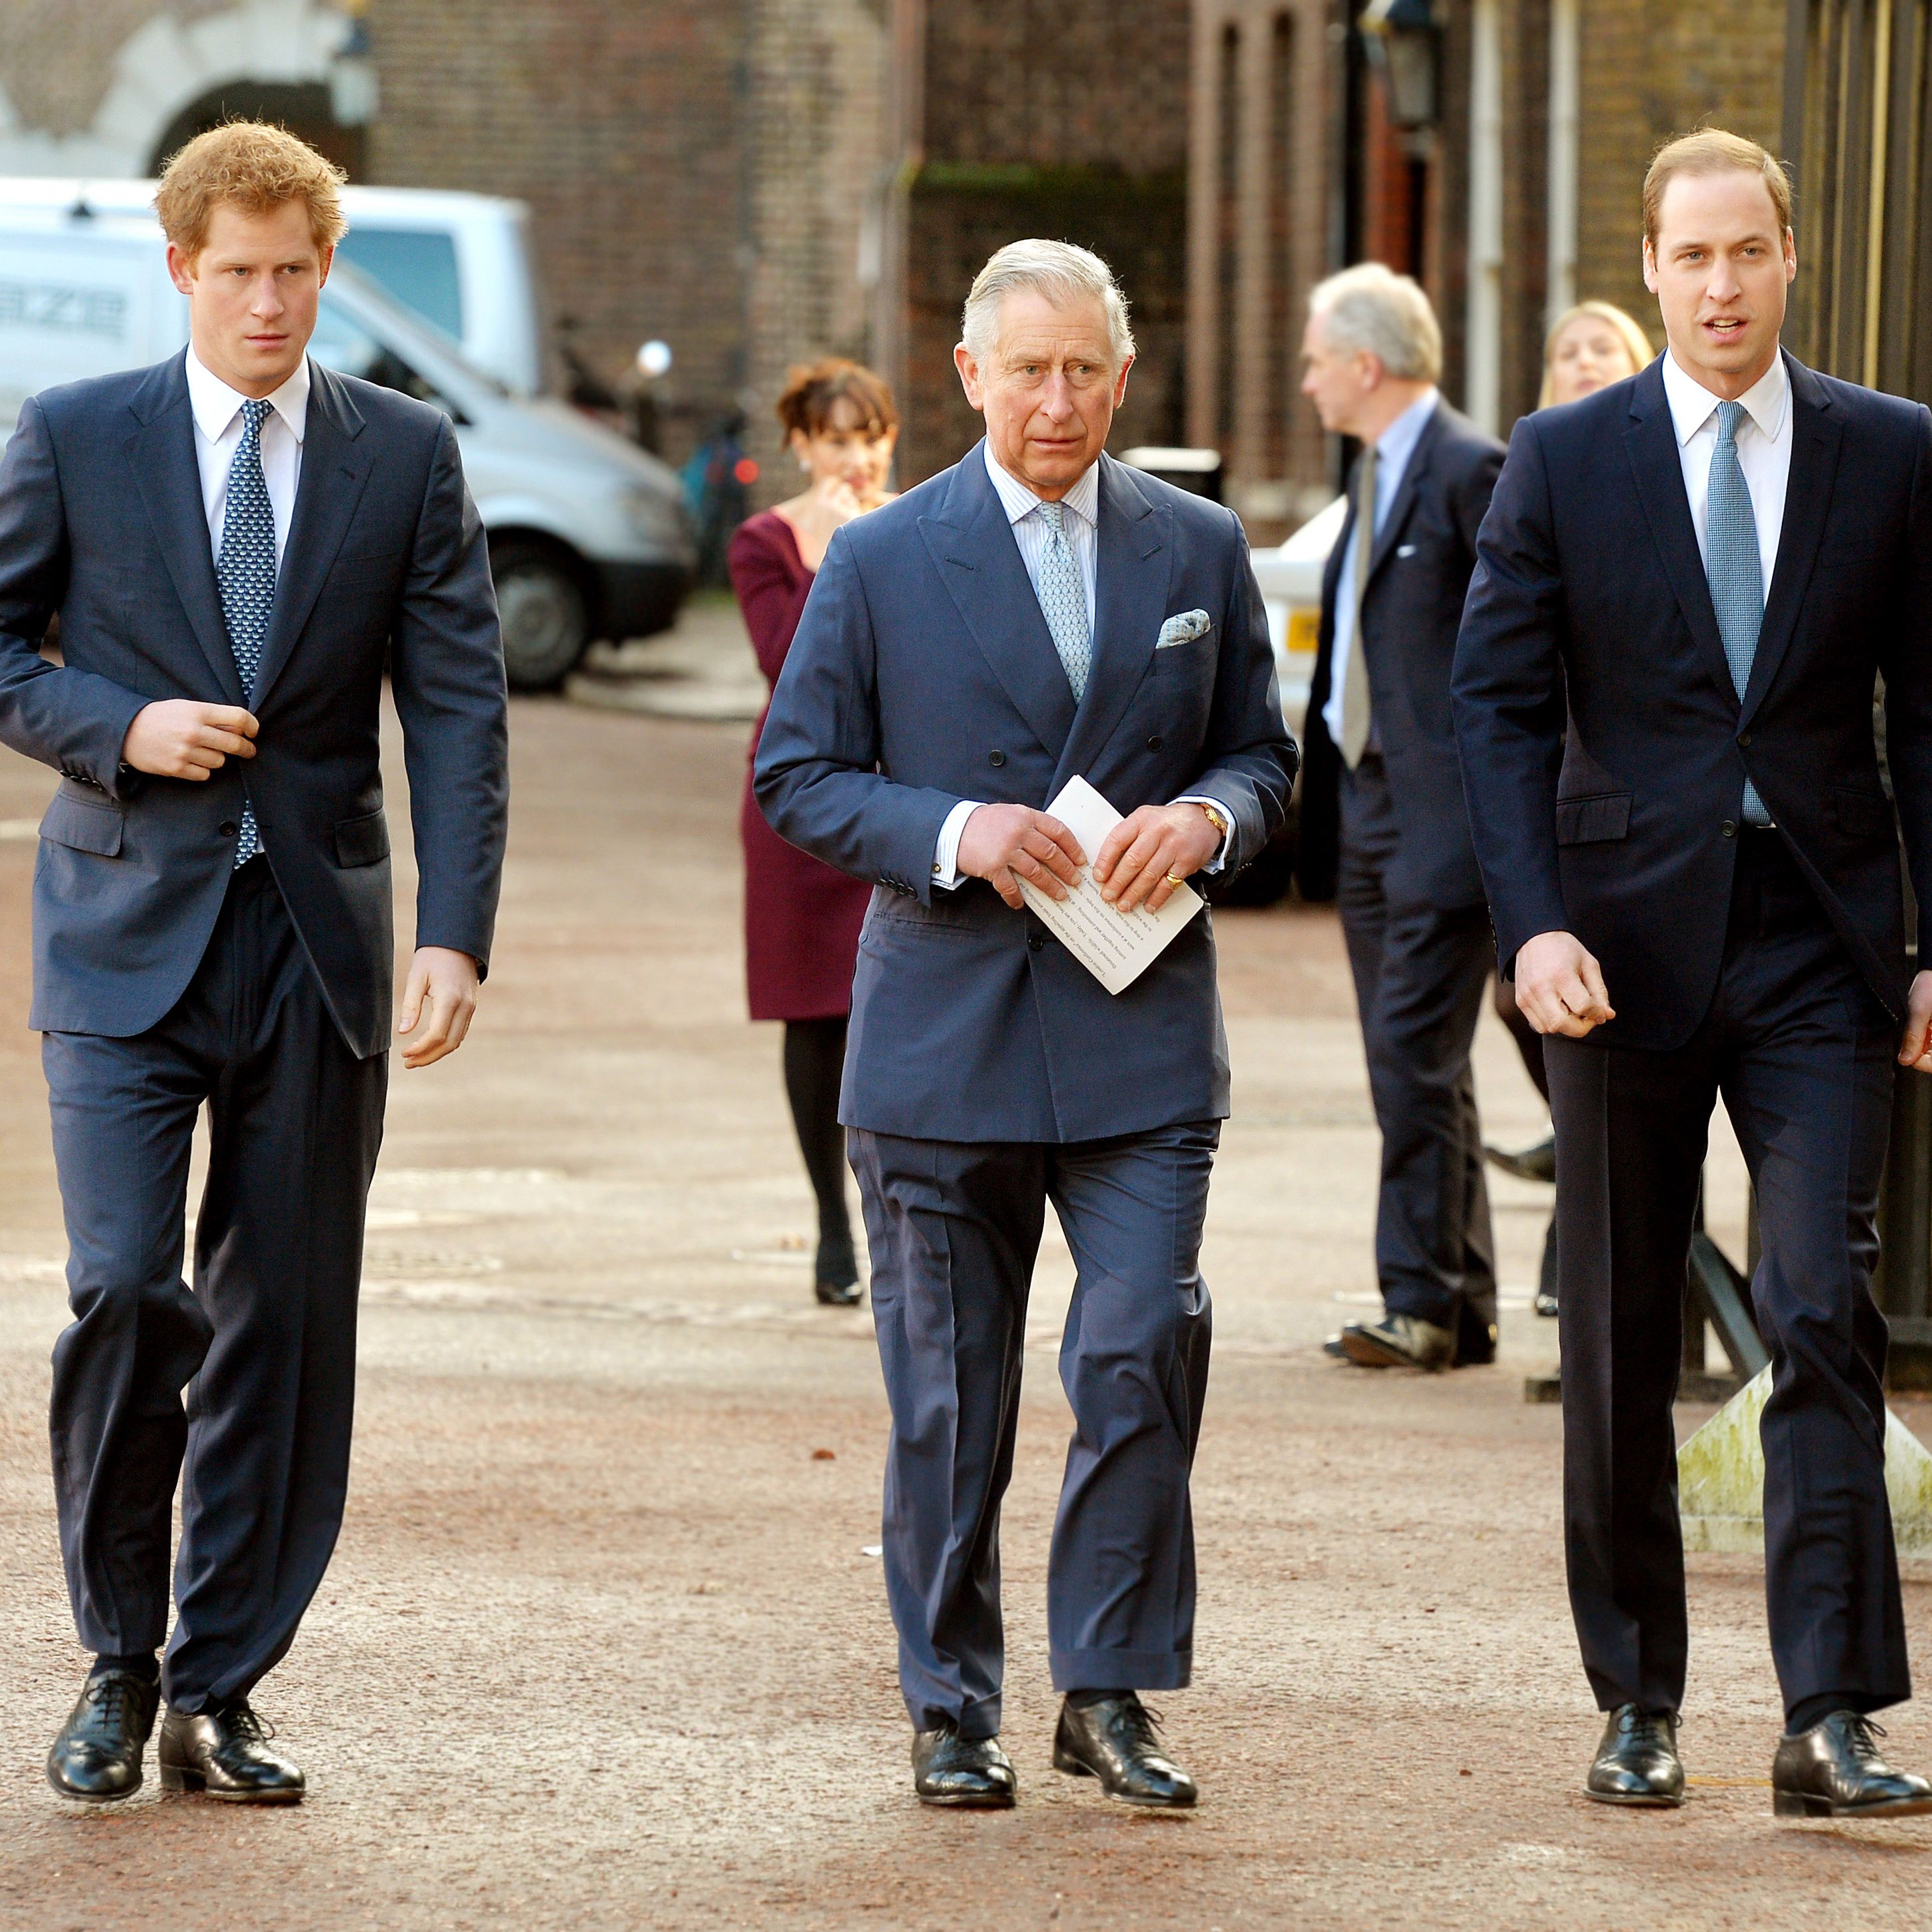 Prince Charles and Prince William Are Treating Prince Harry 